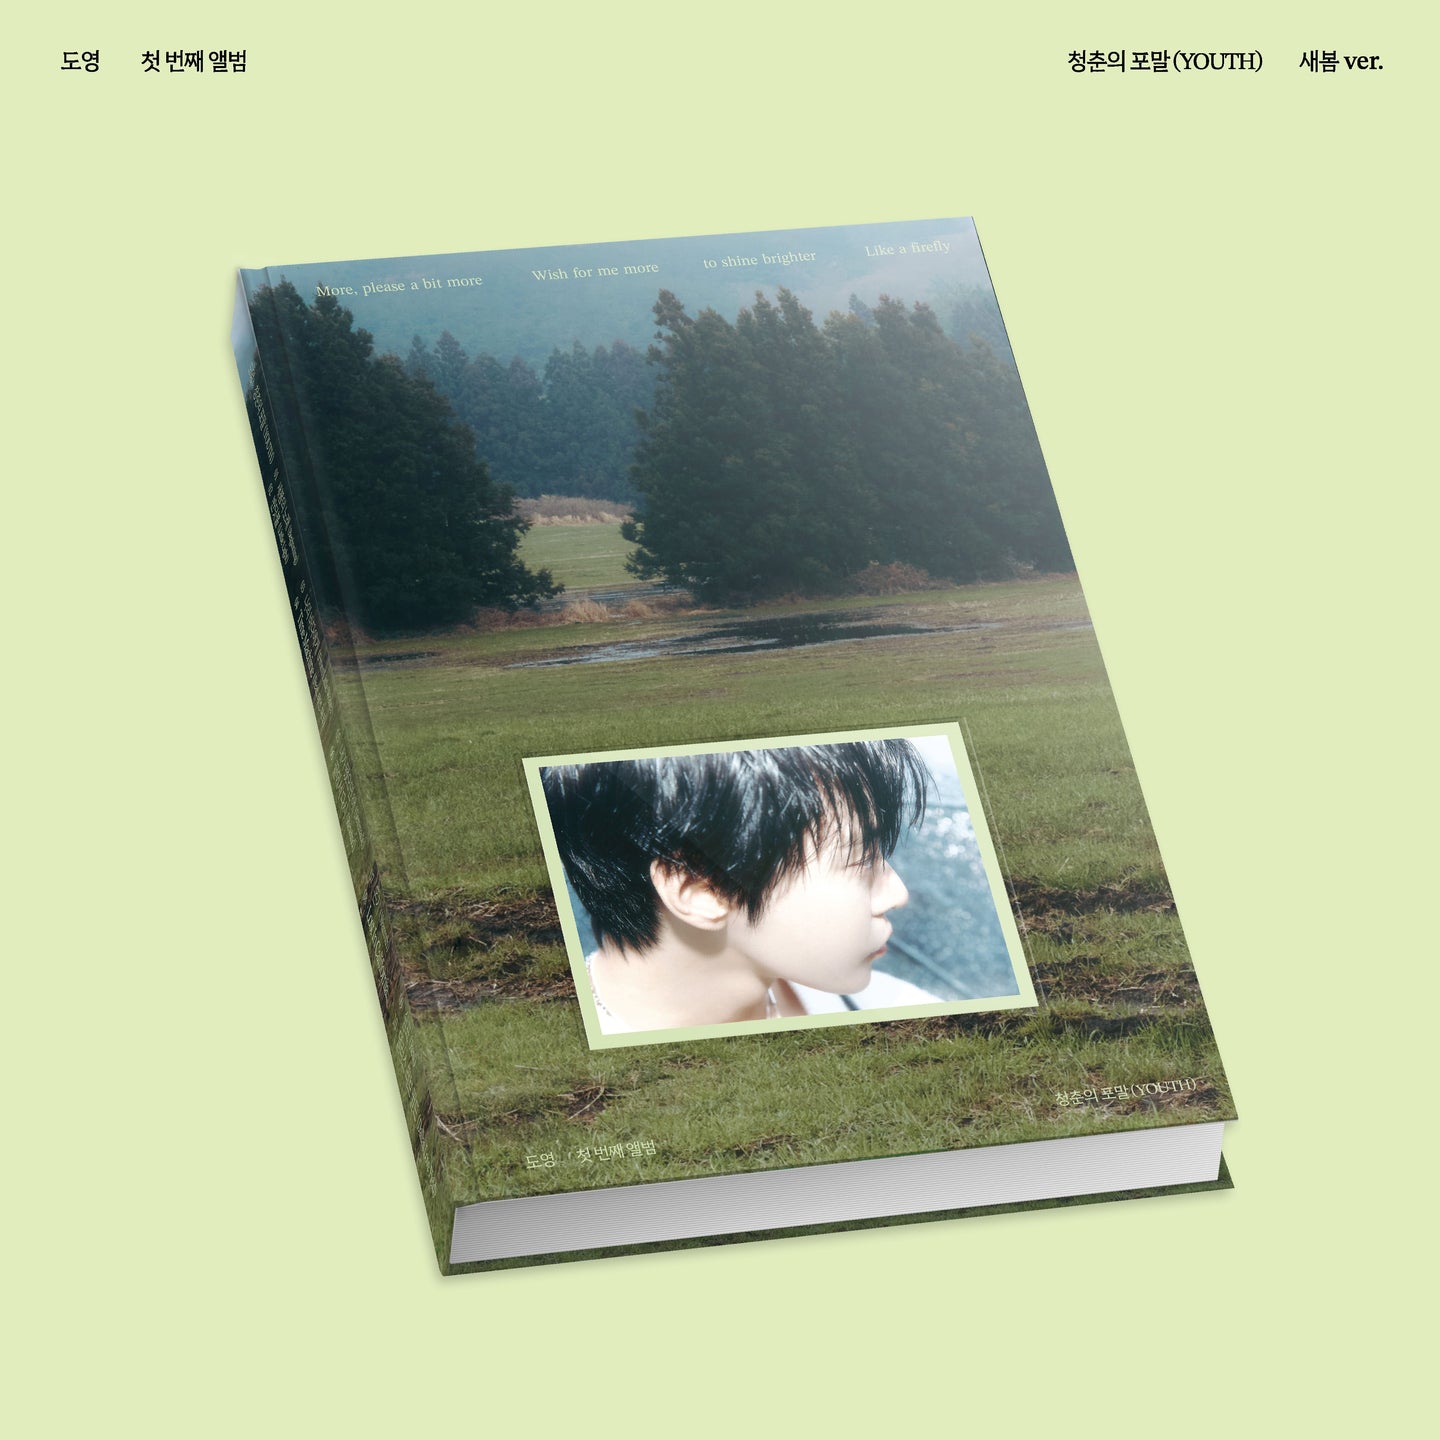 DOYOUNG (NCT) 1ST ALBUM – 청춘의 포말 (YOUTH) (새봄 Ver.)